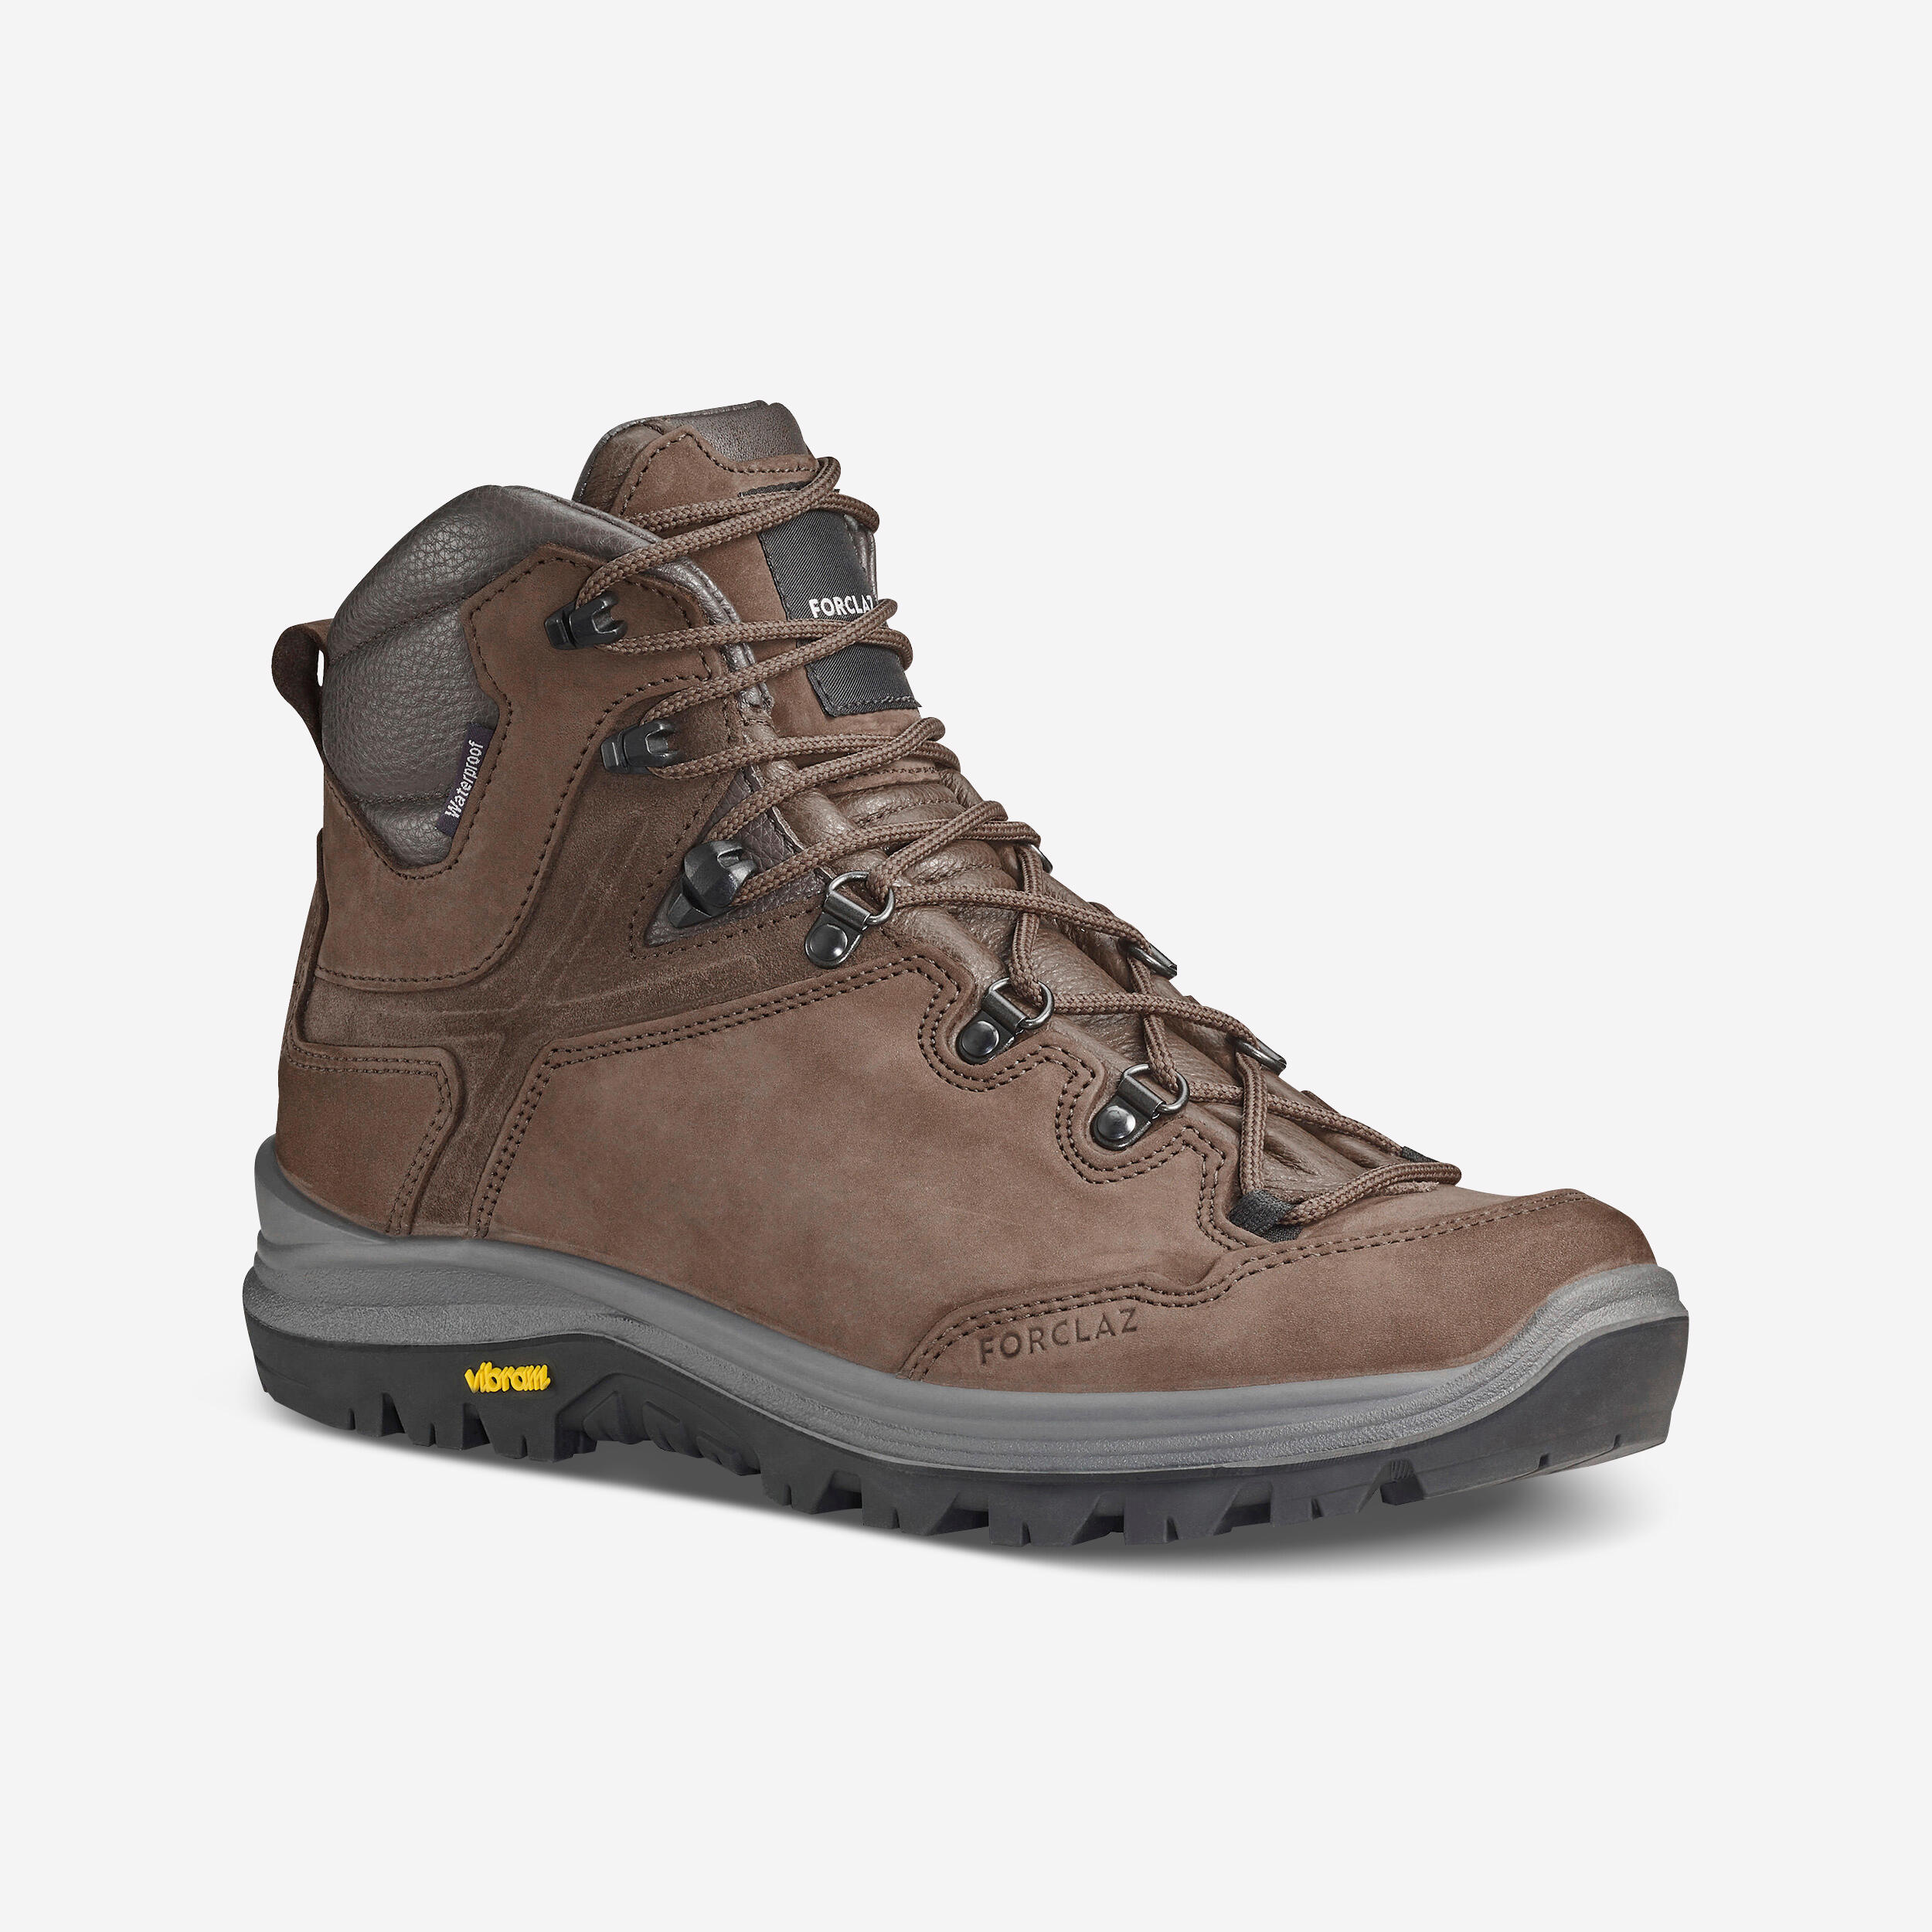 Image of Men’s Leather Hiking Boots – MT 500